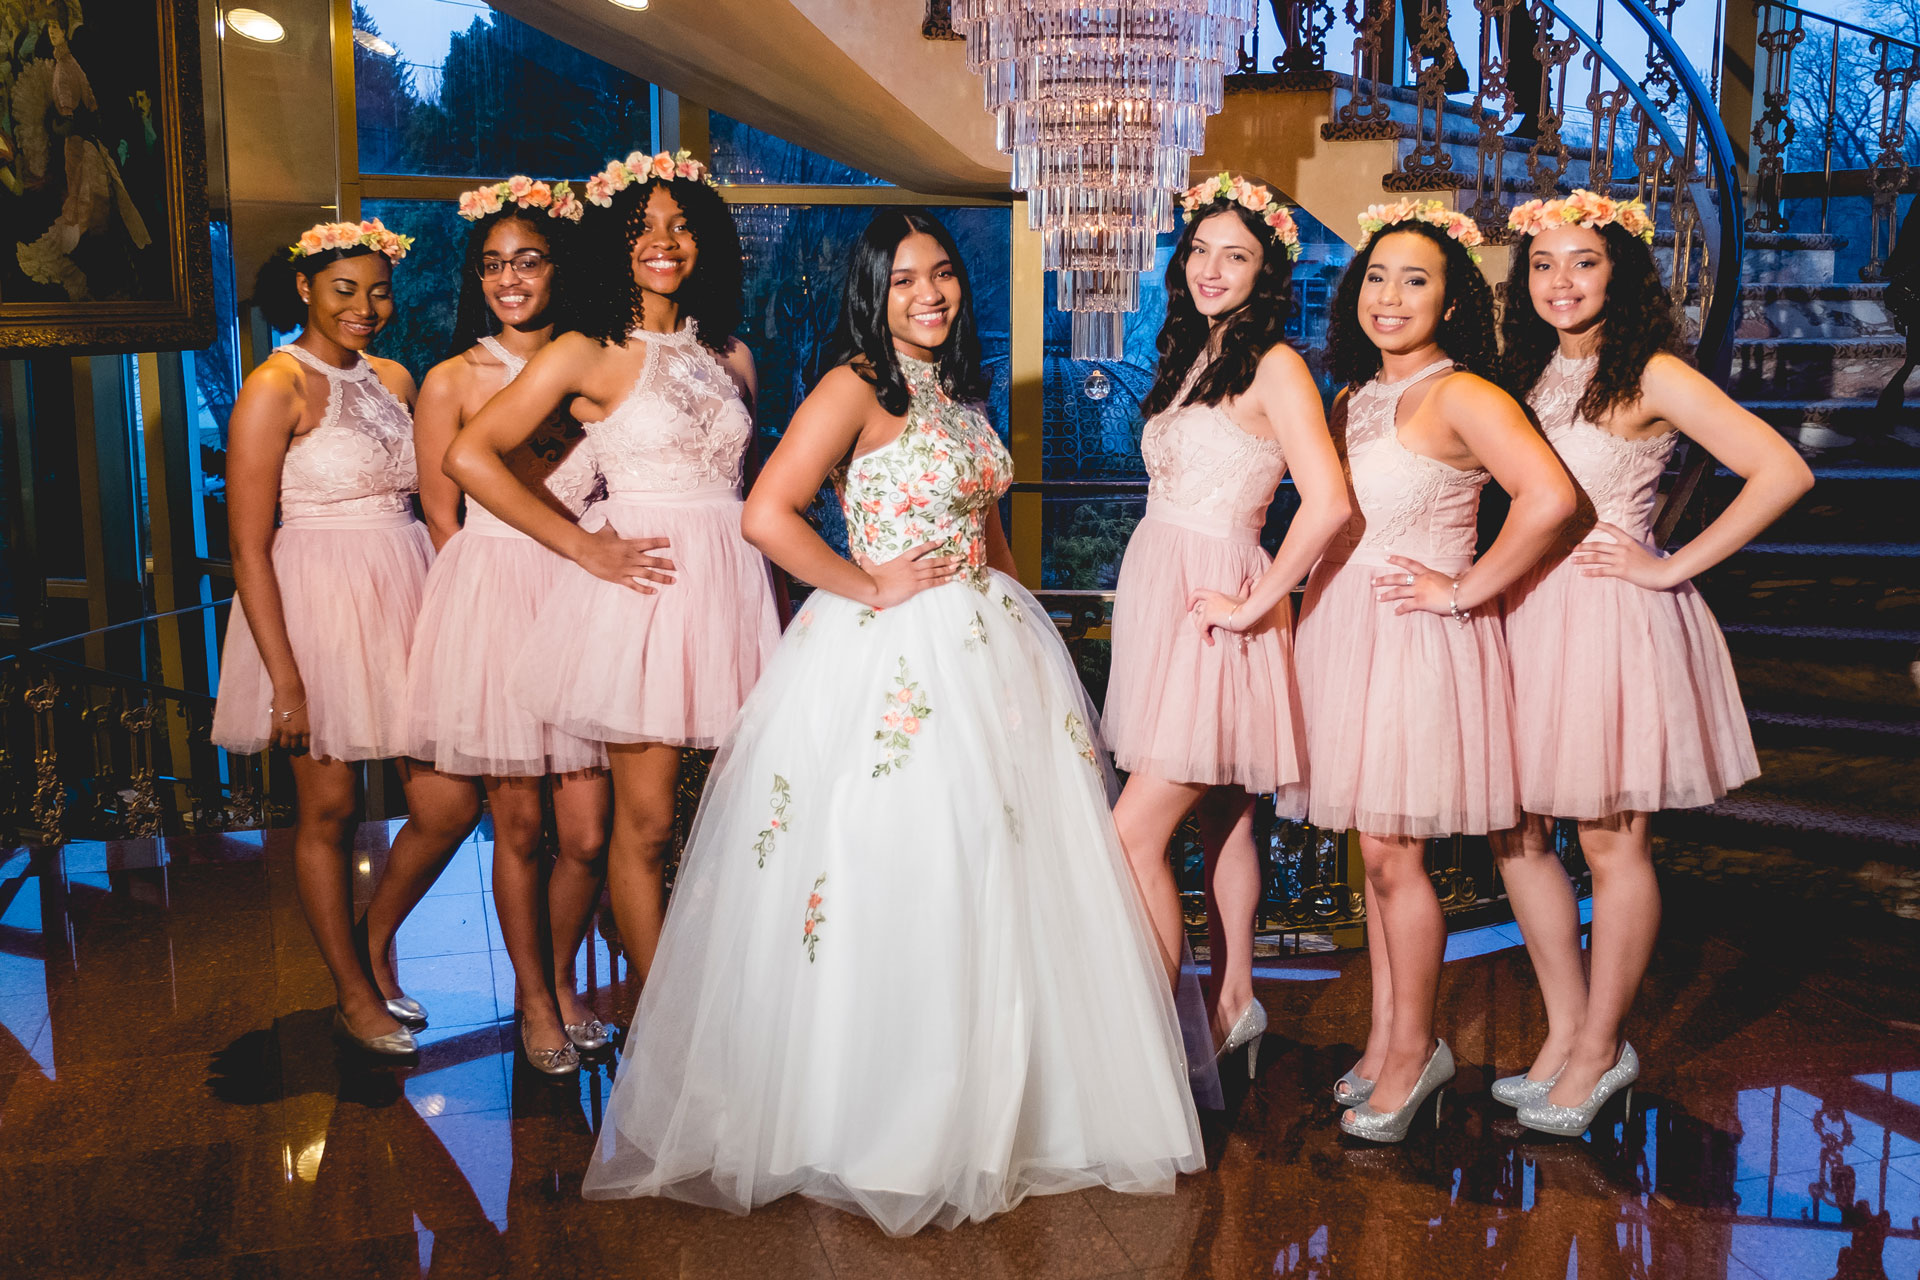 Unforgettable Quinceanera at a stunning venue